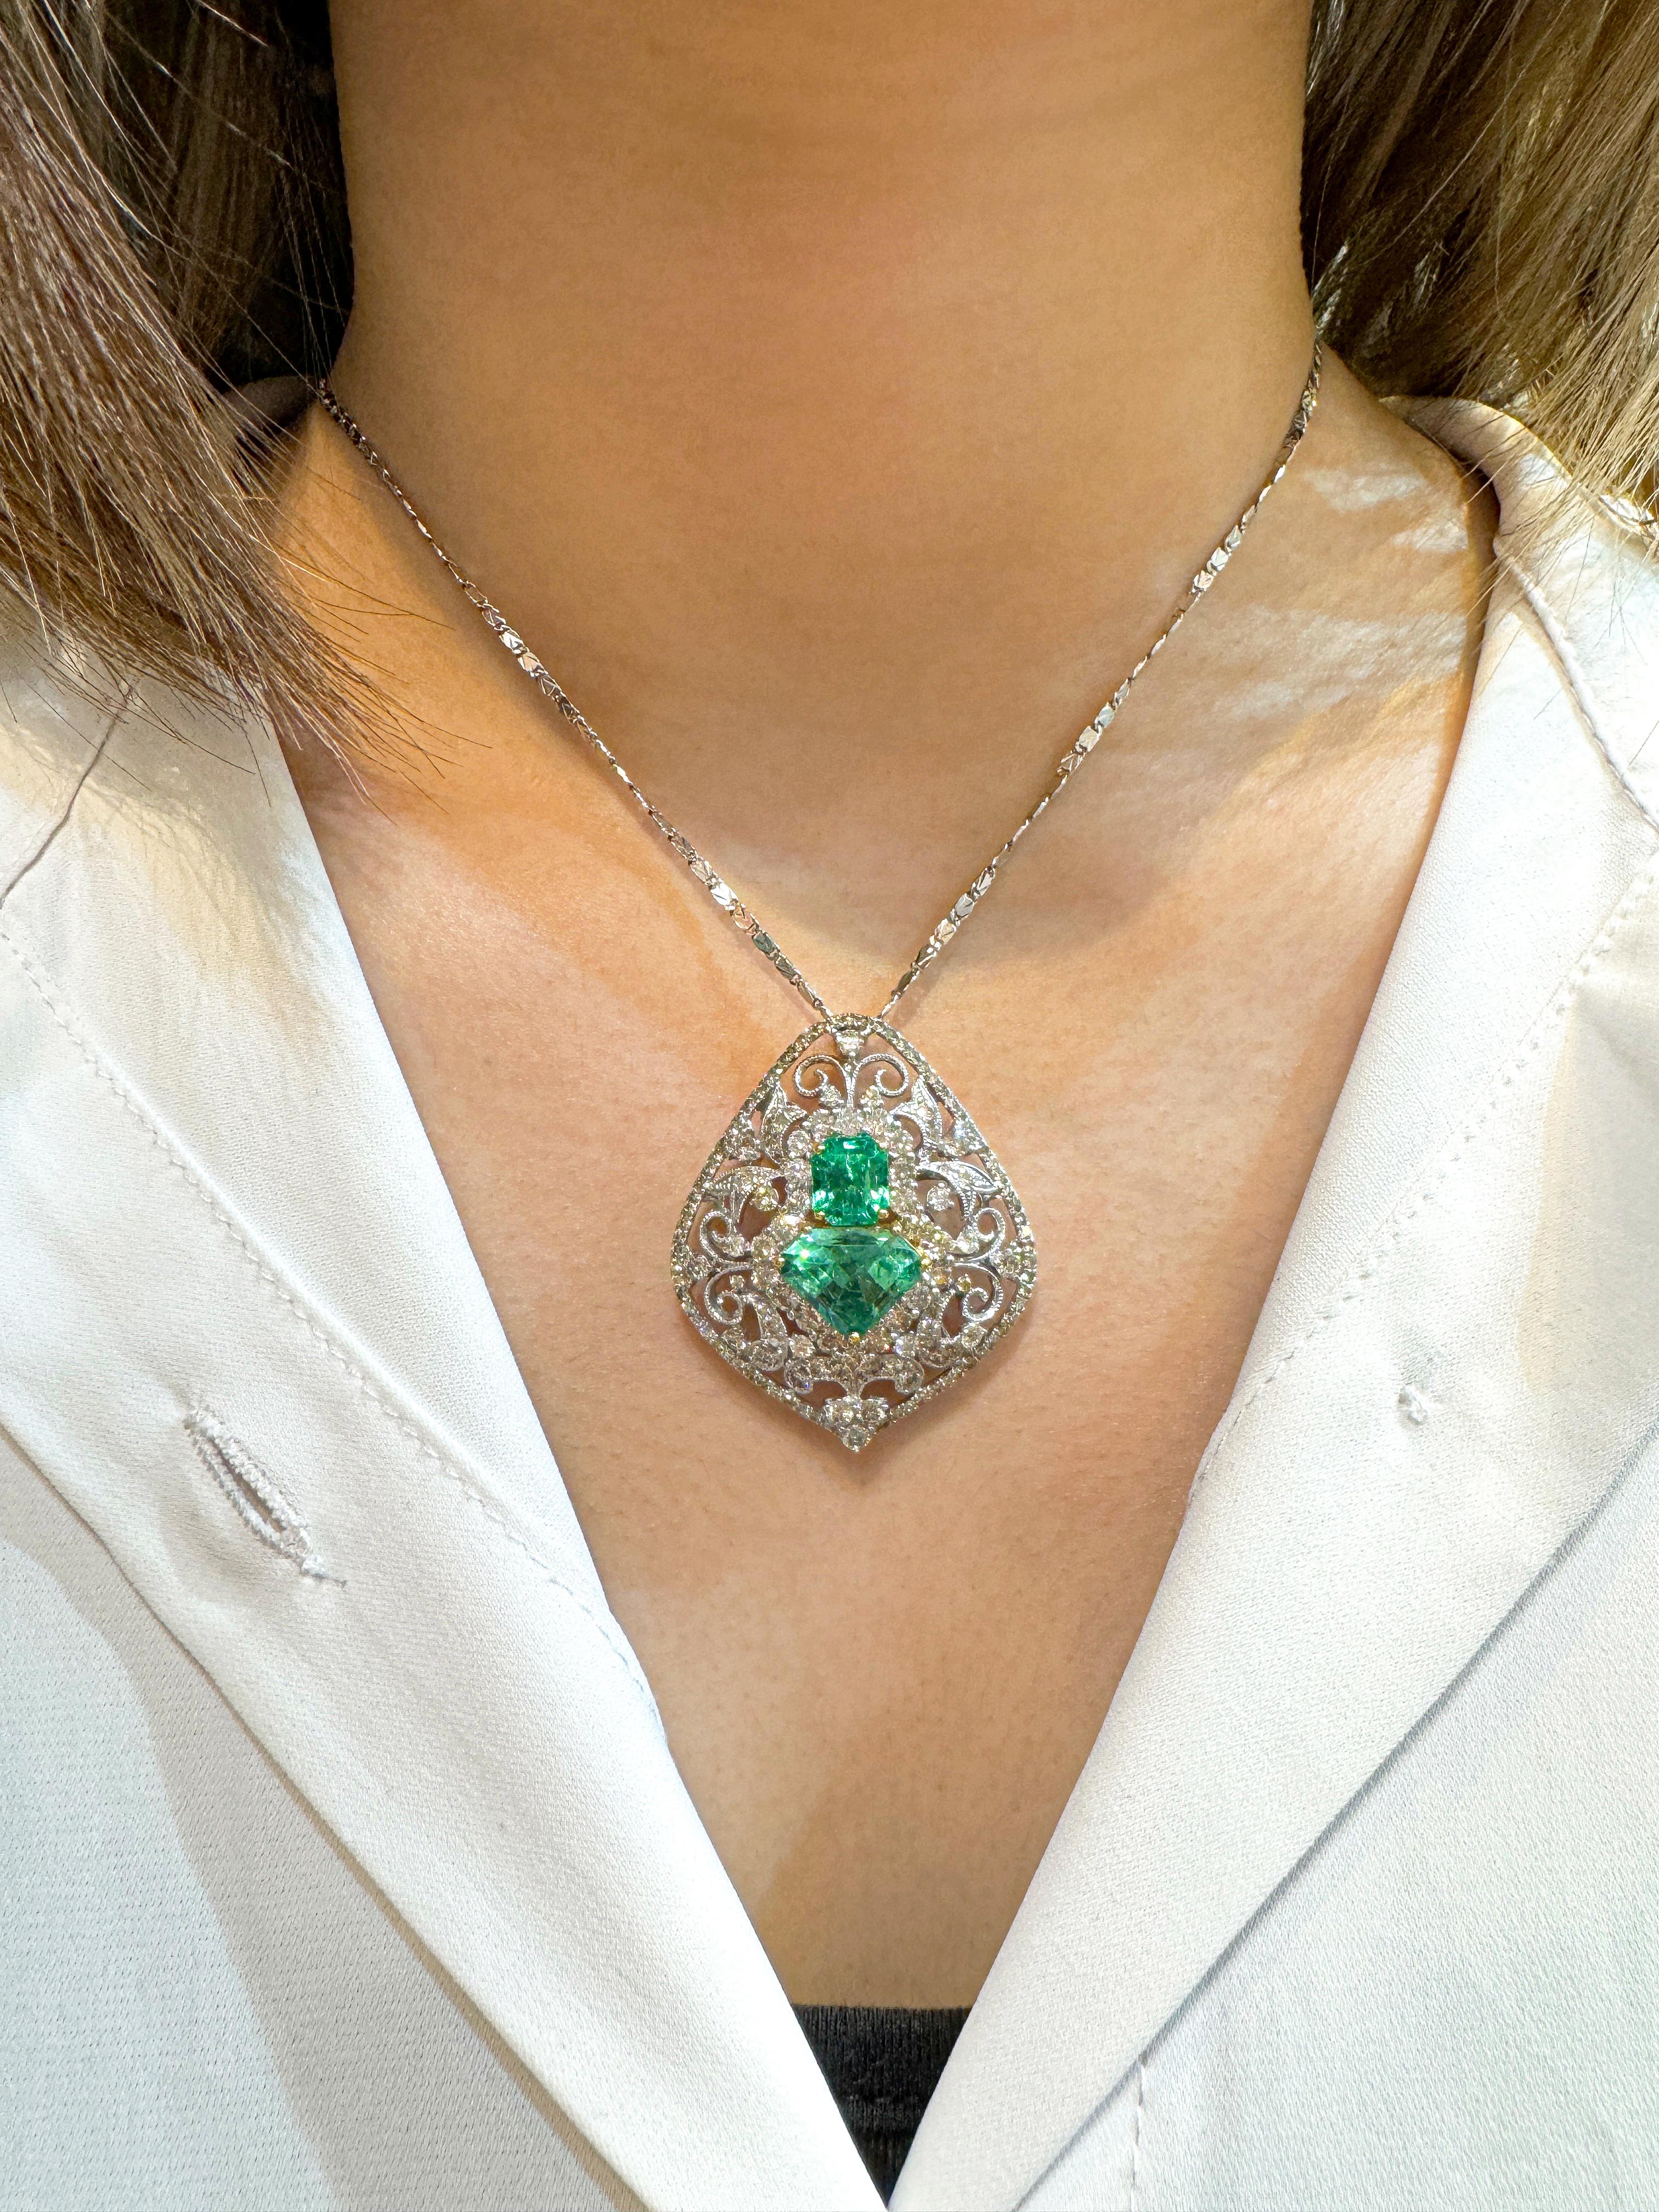 Vintage Carved 18K White Gold Pendant Necklace With Shield Cut Emeralds For Sale 3